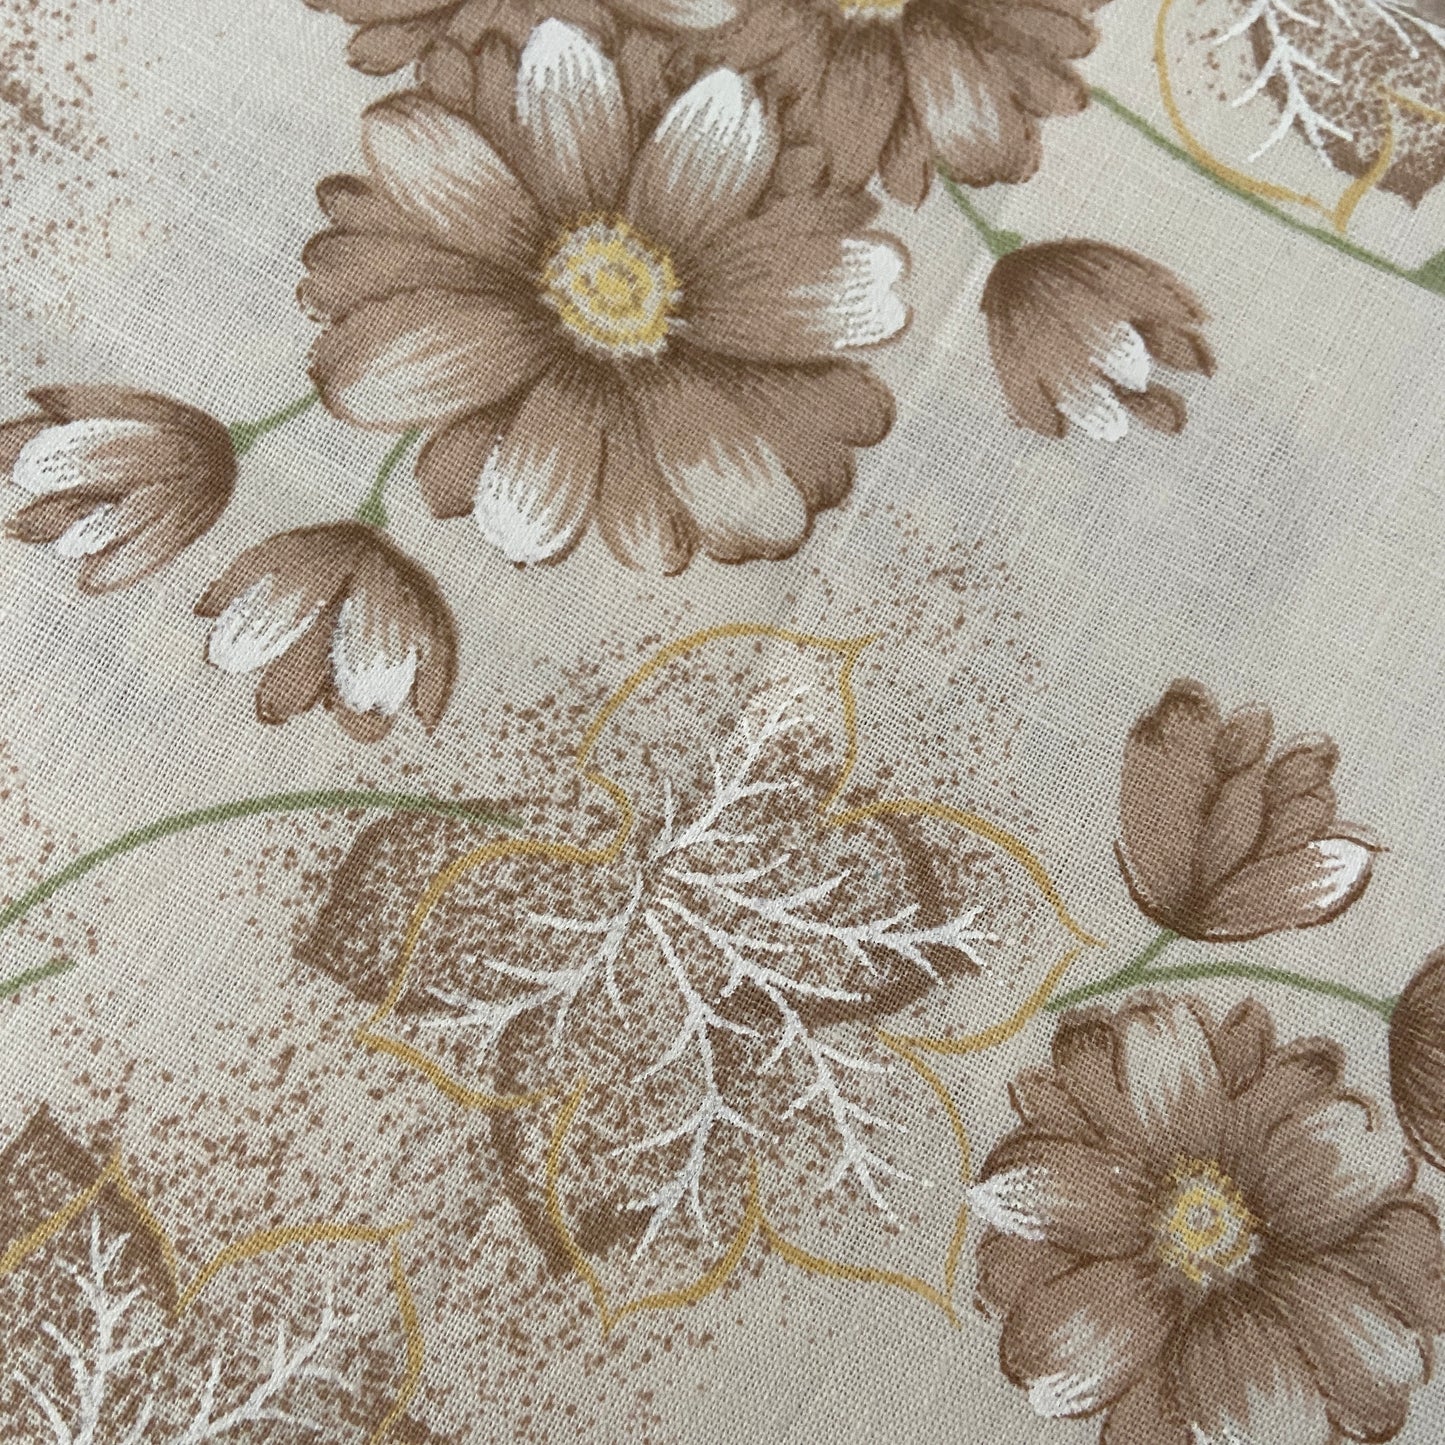 UNUSED Cotton BROWN Sheet FLORAL Flat & Fitted